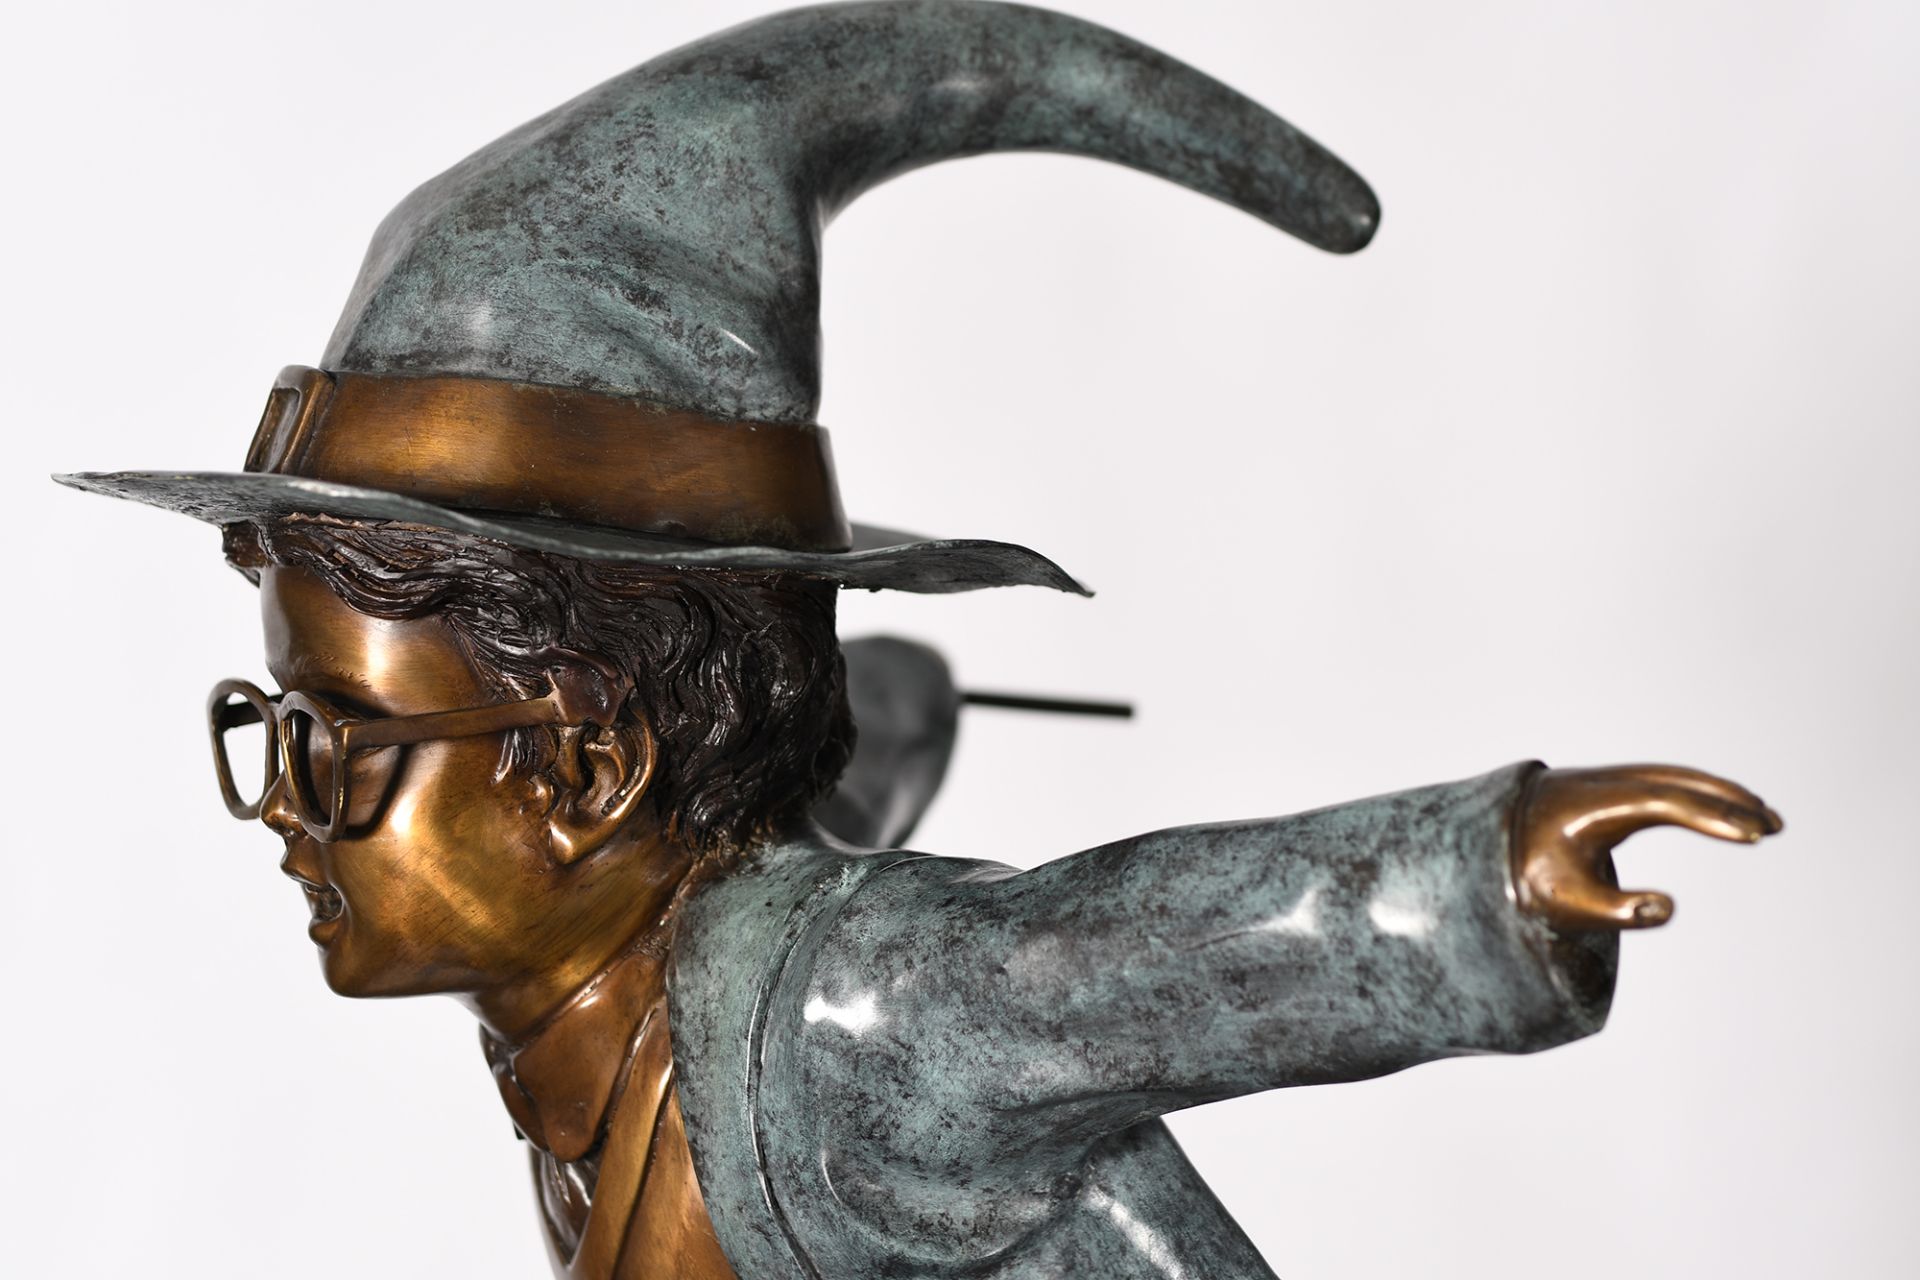 Large 4ft Bronze Wizard Figure - Image 6 of 10